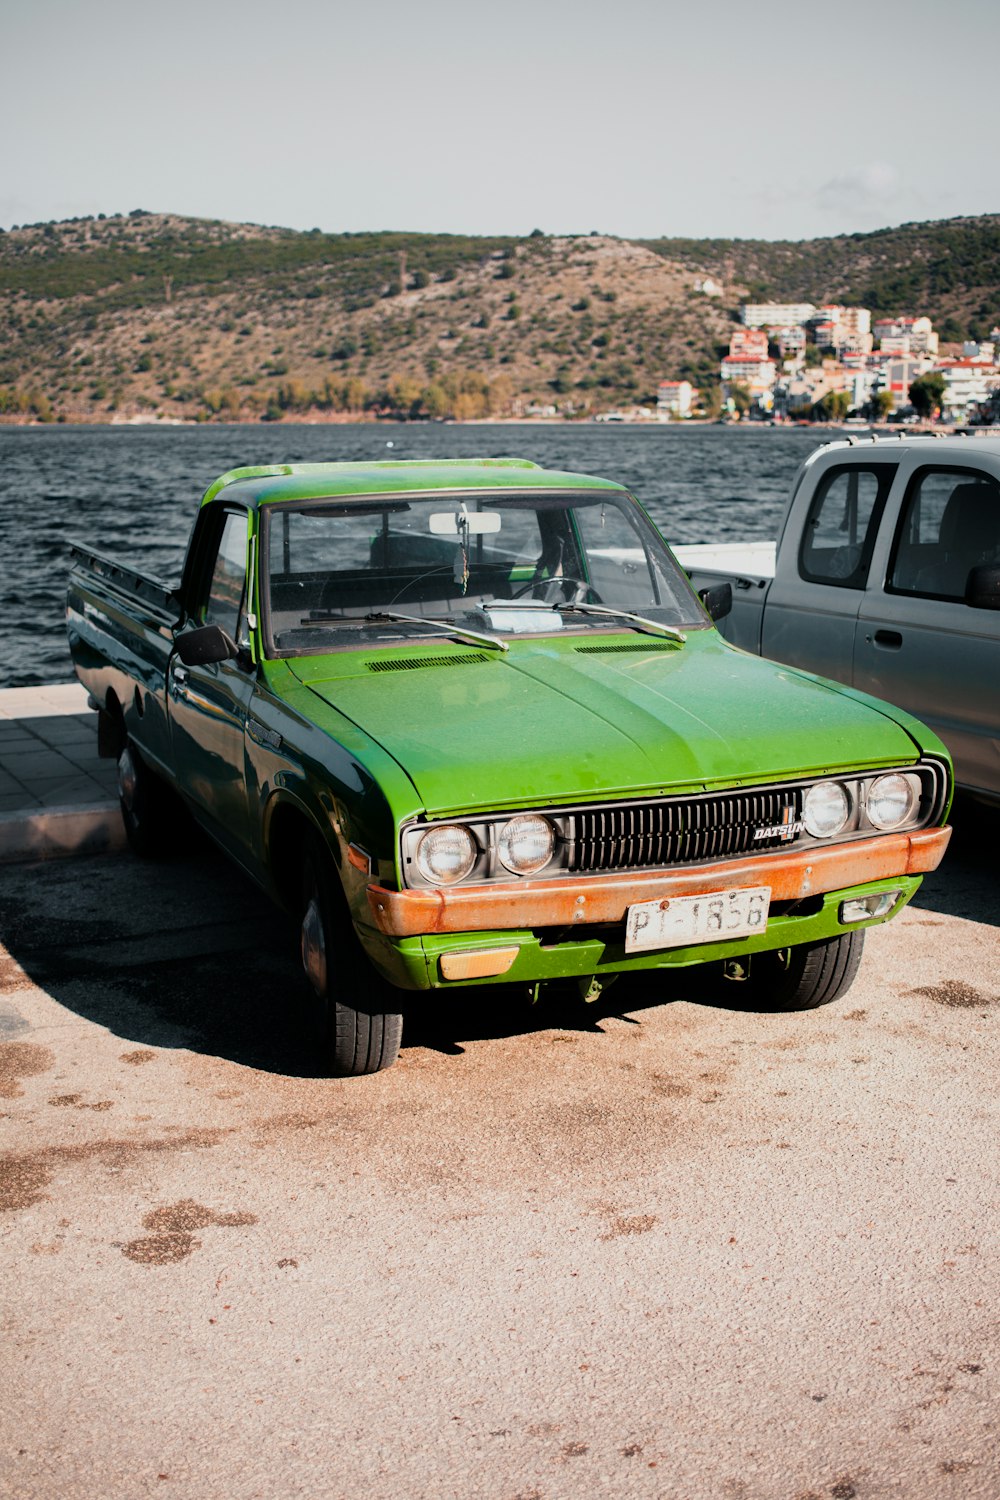 green car parked near body of water during daytime